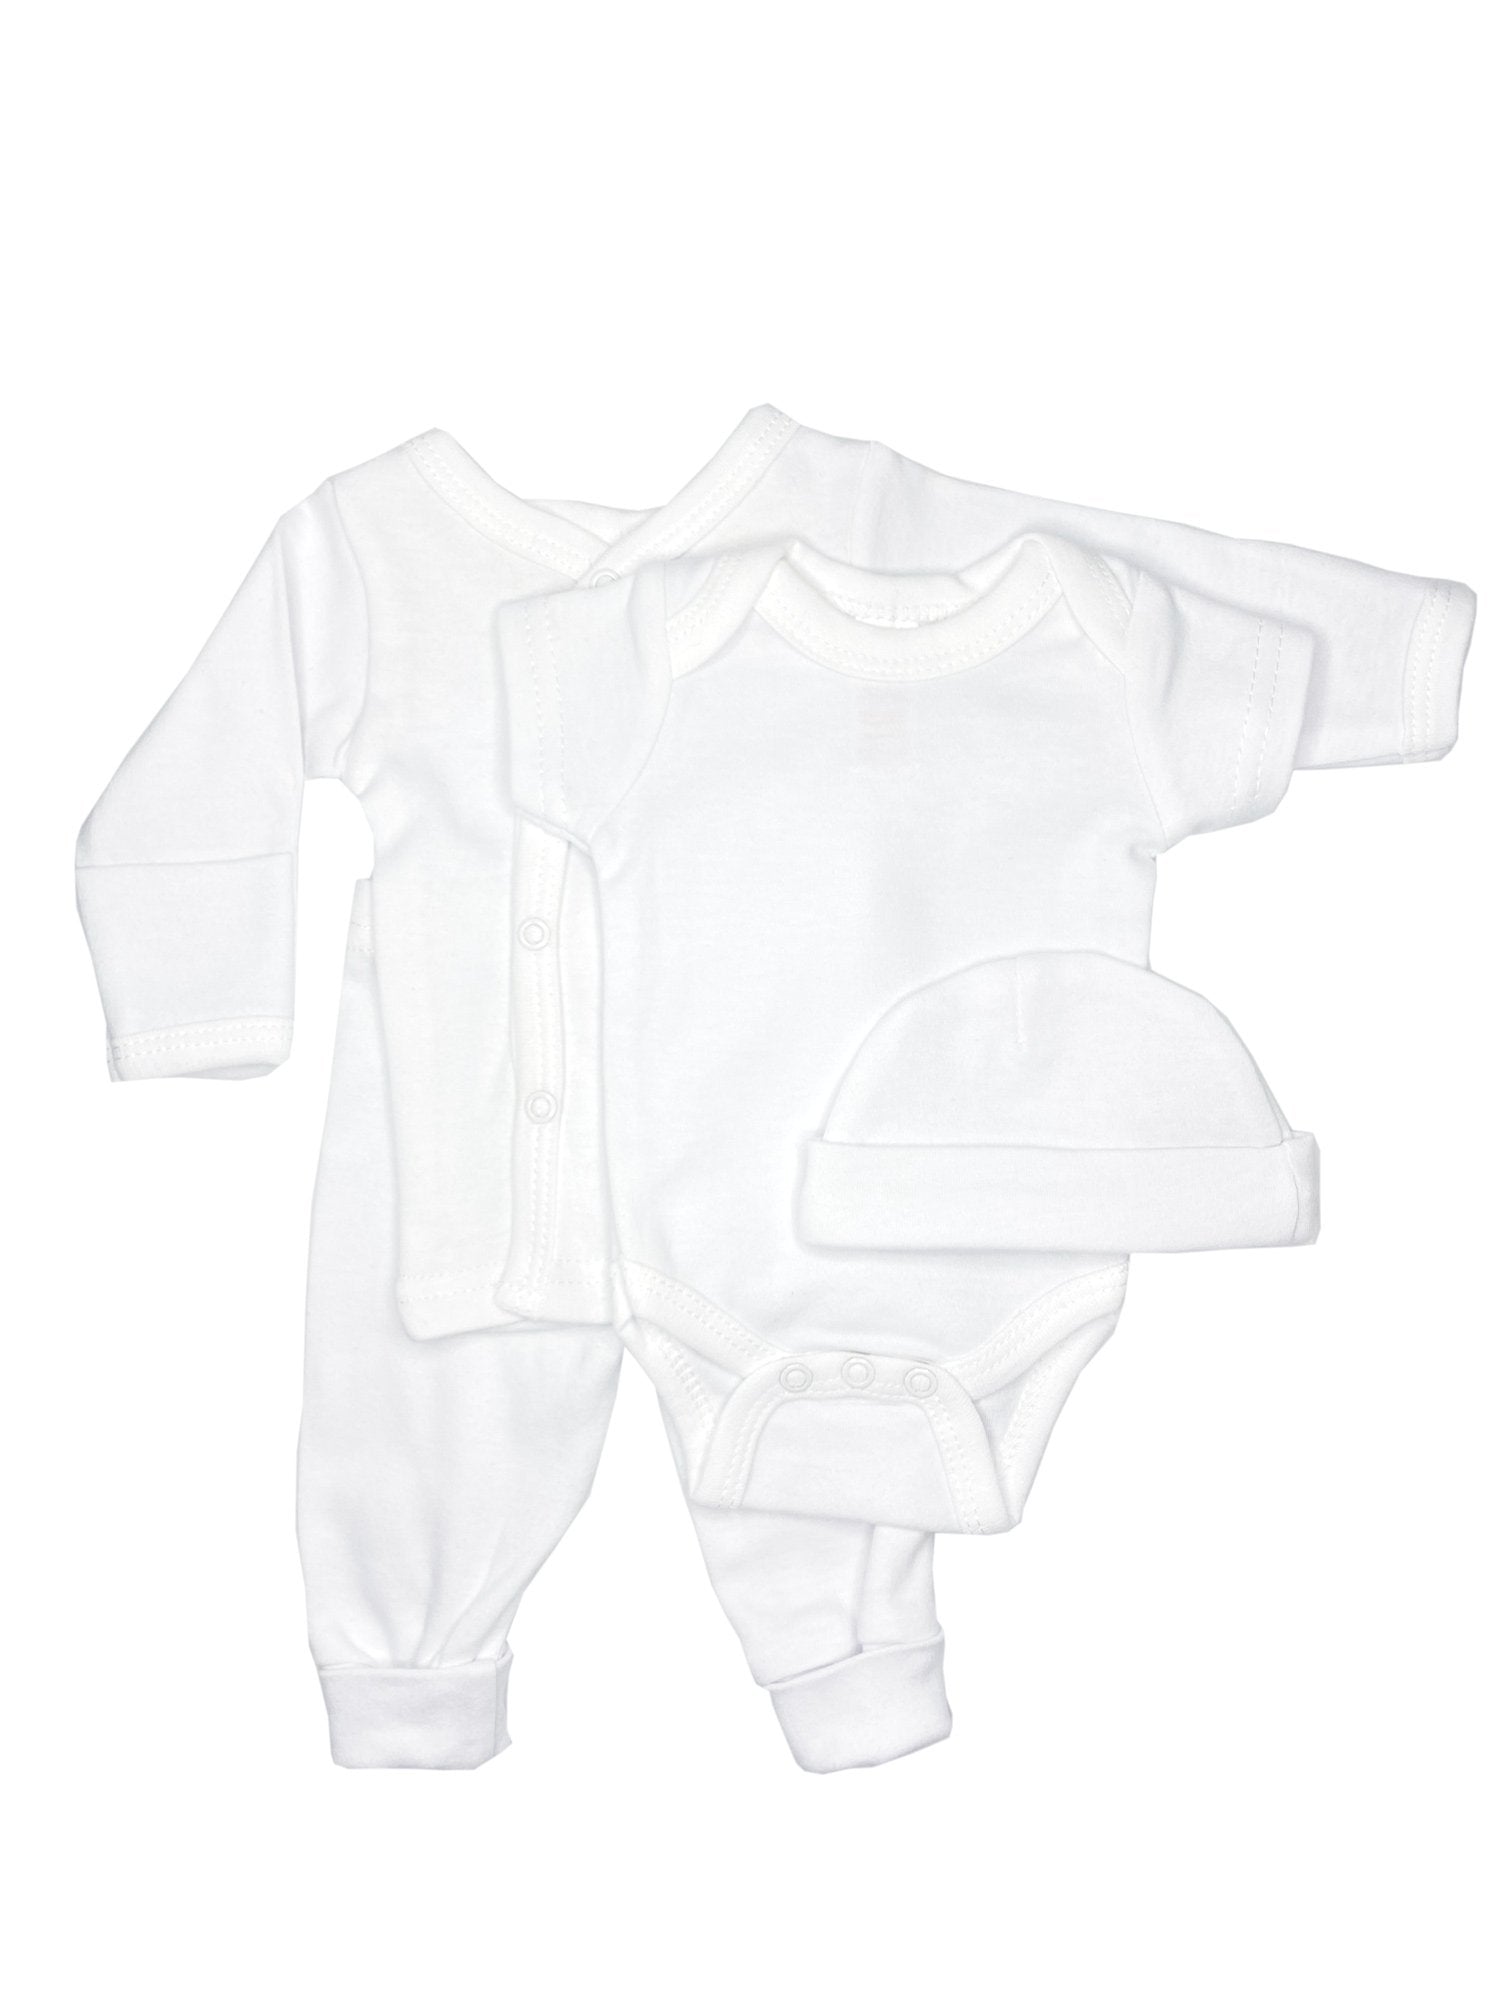 Classic White 4 piece set - Vest, Top, Trousers & Hat Outift Soft Touch 